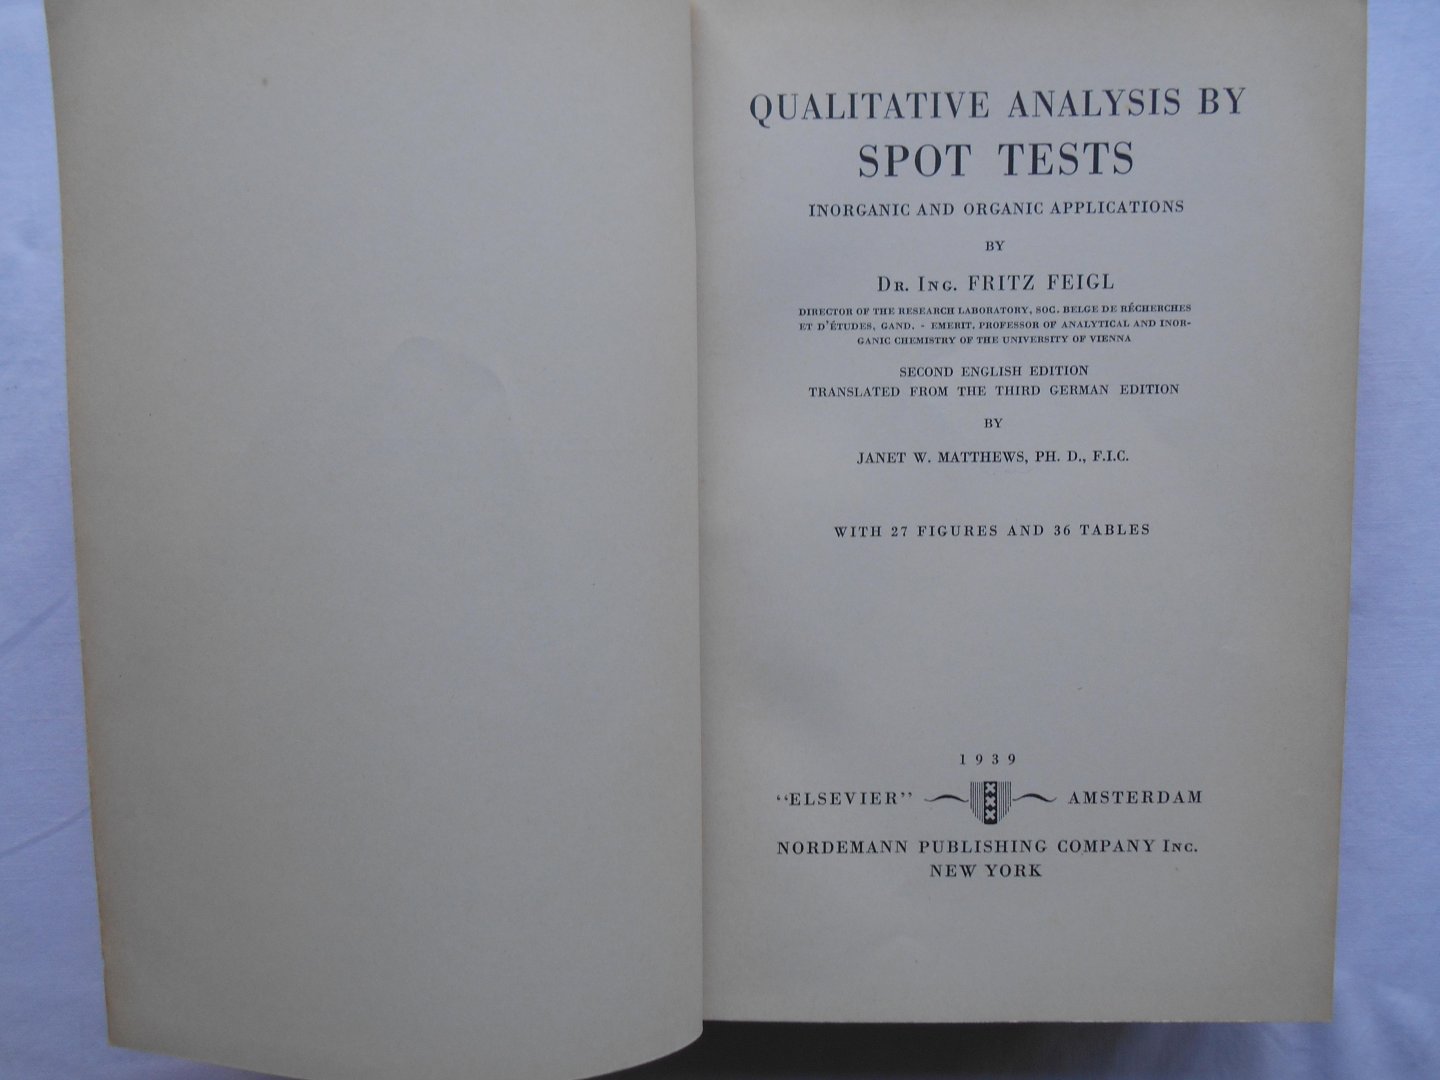 Feigl, Dr. Fritz - Qualitative analysis by spot tests